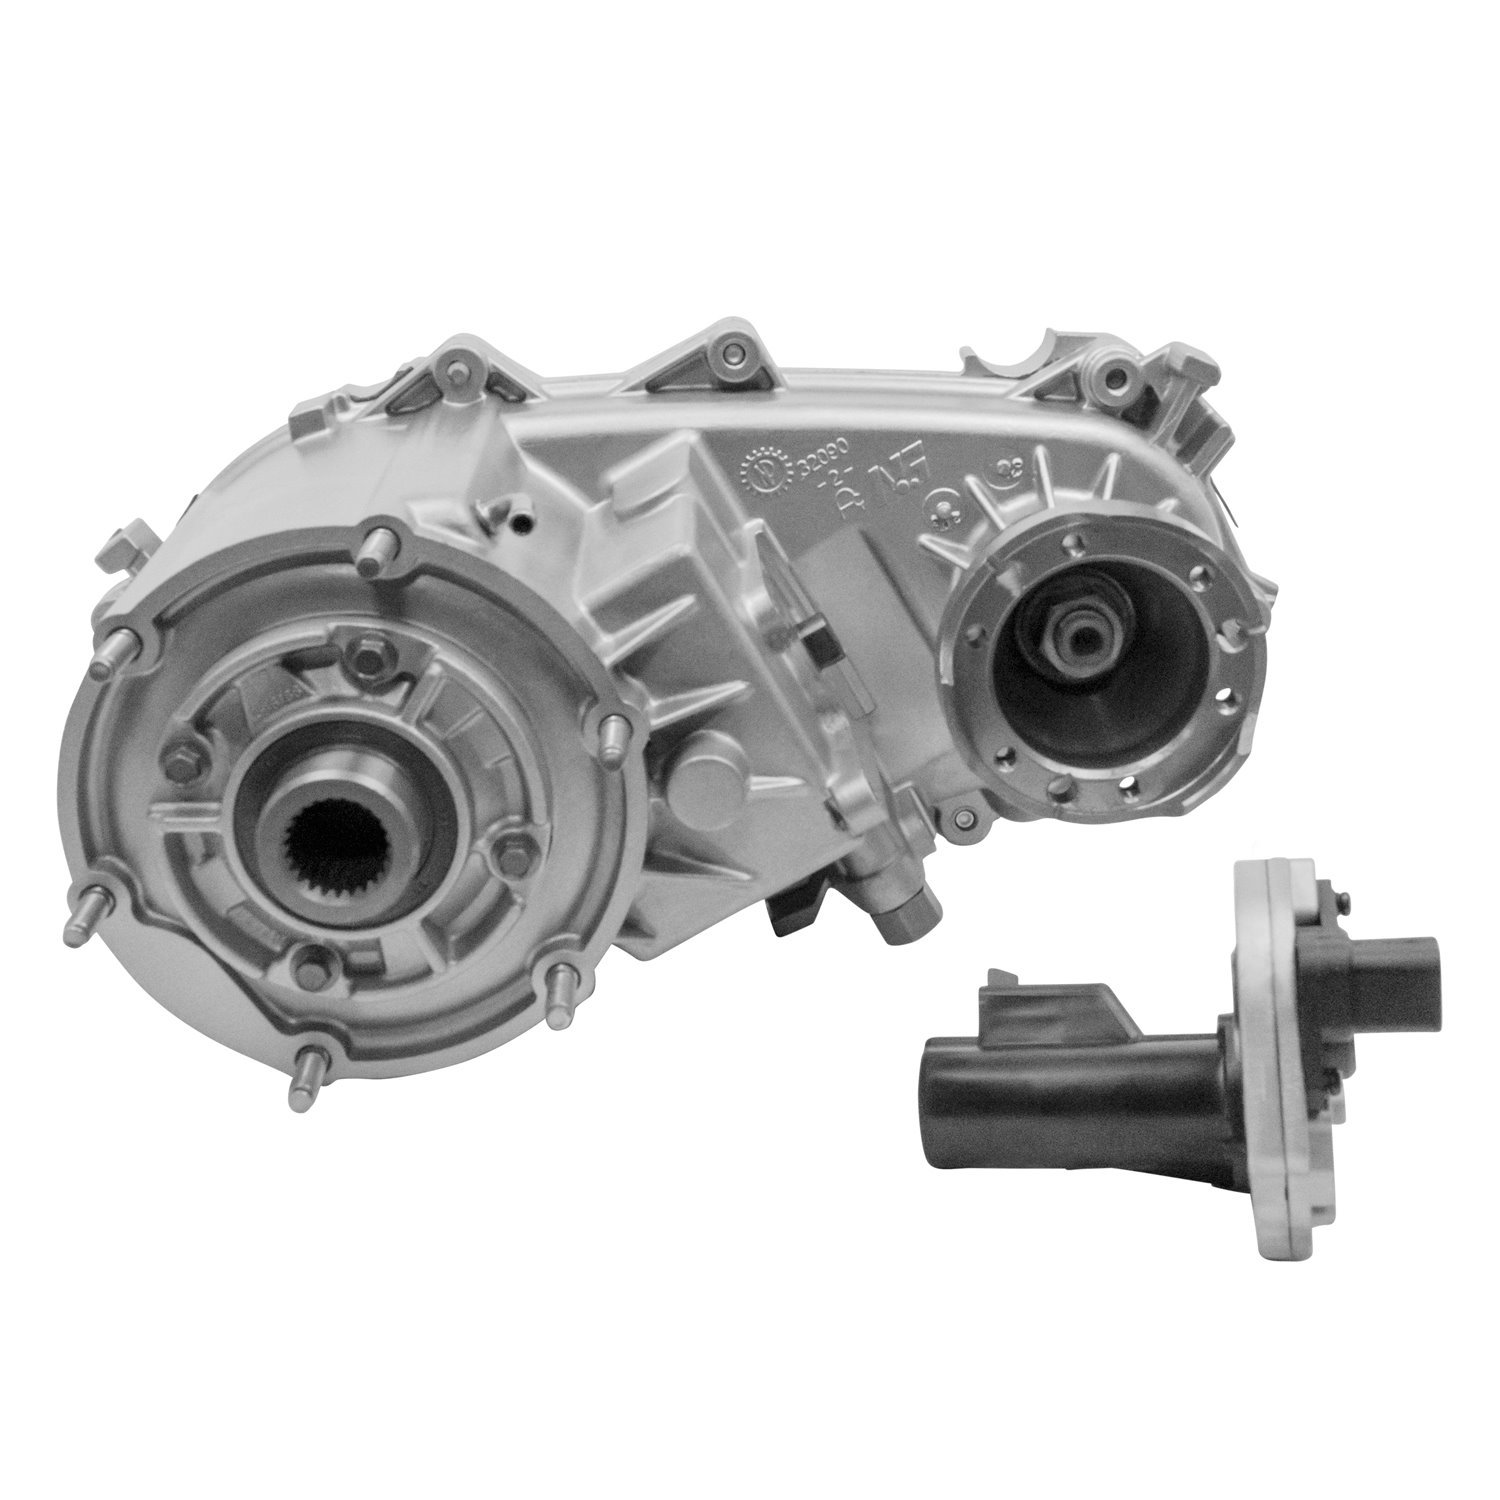 Remanufactured NP133 Electric Shift Transfer Case For 2002-2003 Dodge Durango With Shift Motor